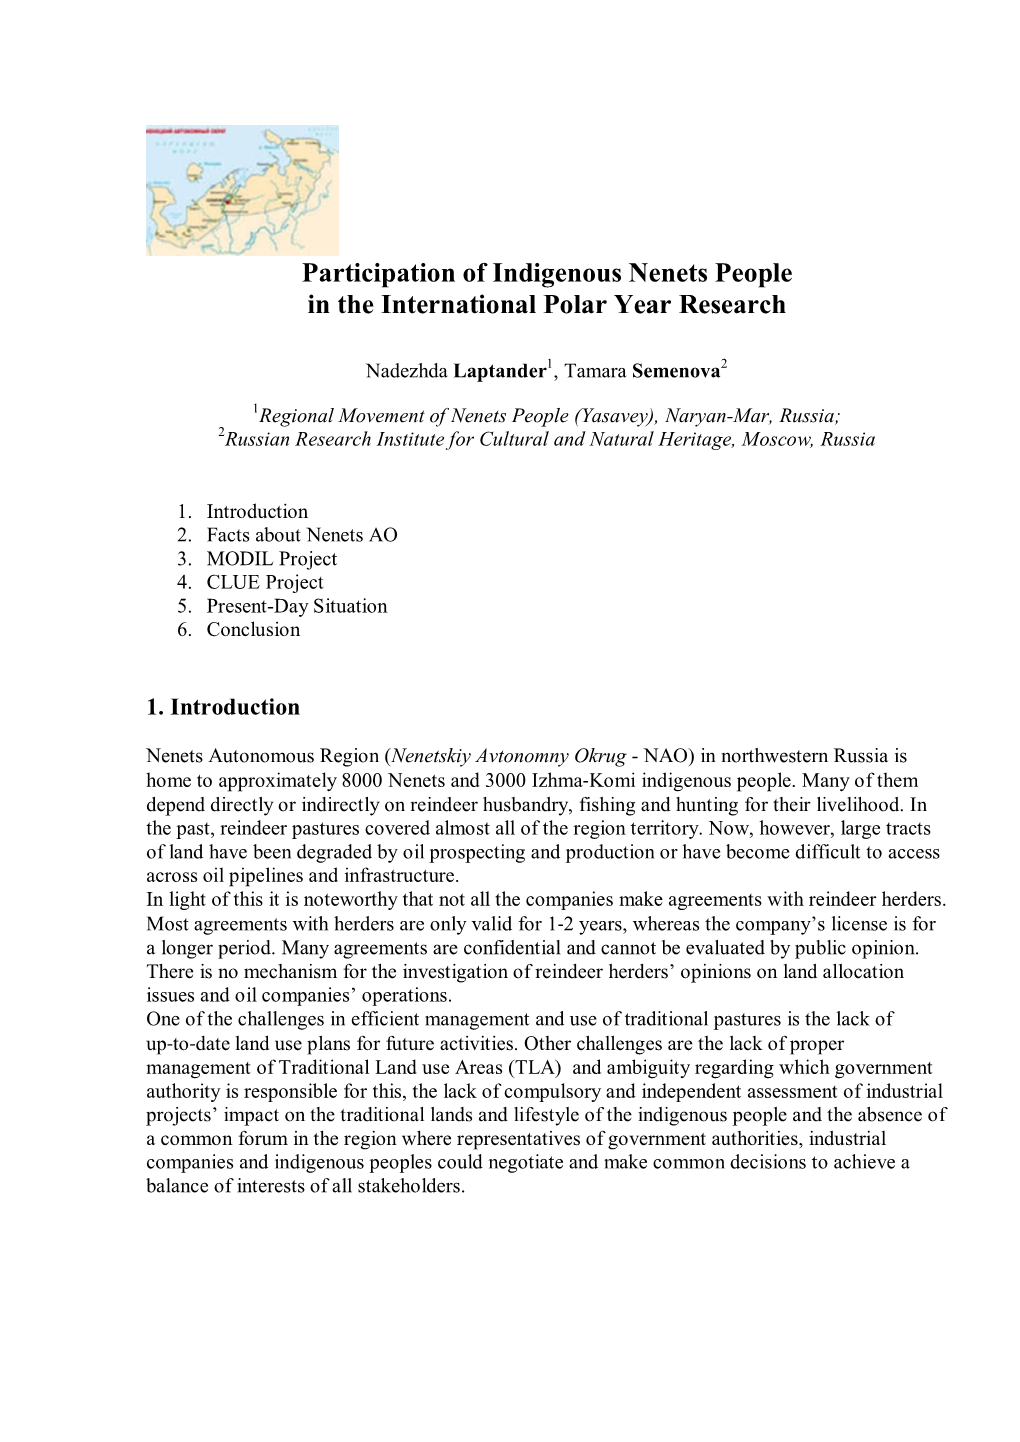 Participation of Indigenous Nenets People in the International Polar Year Research